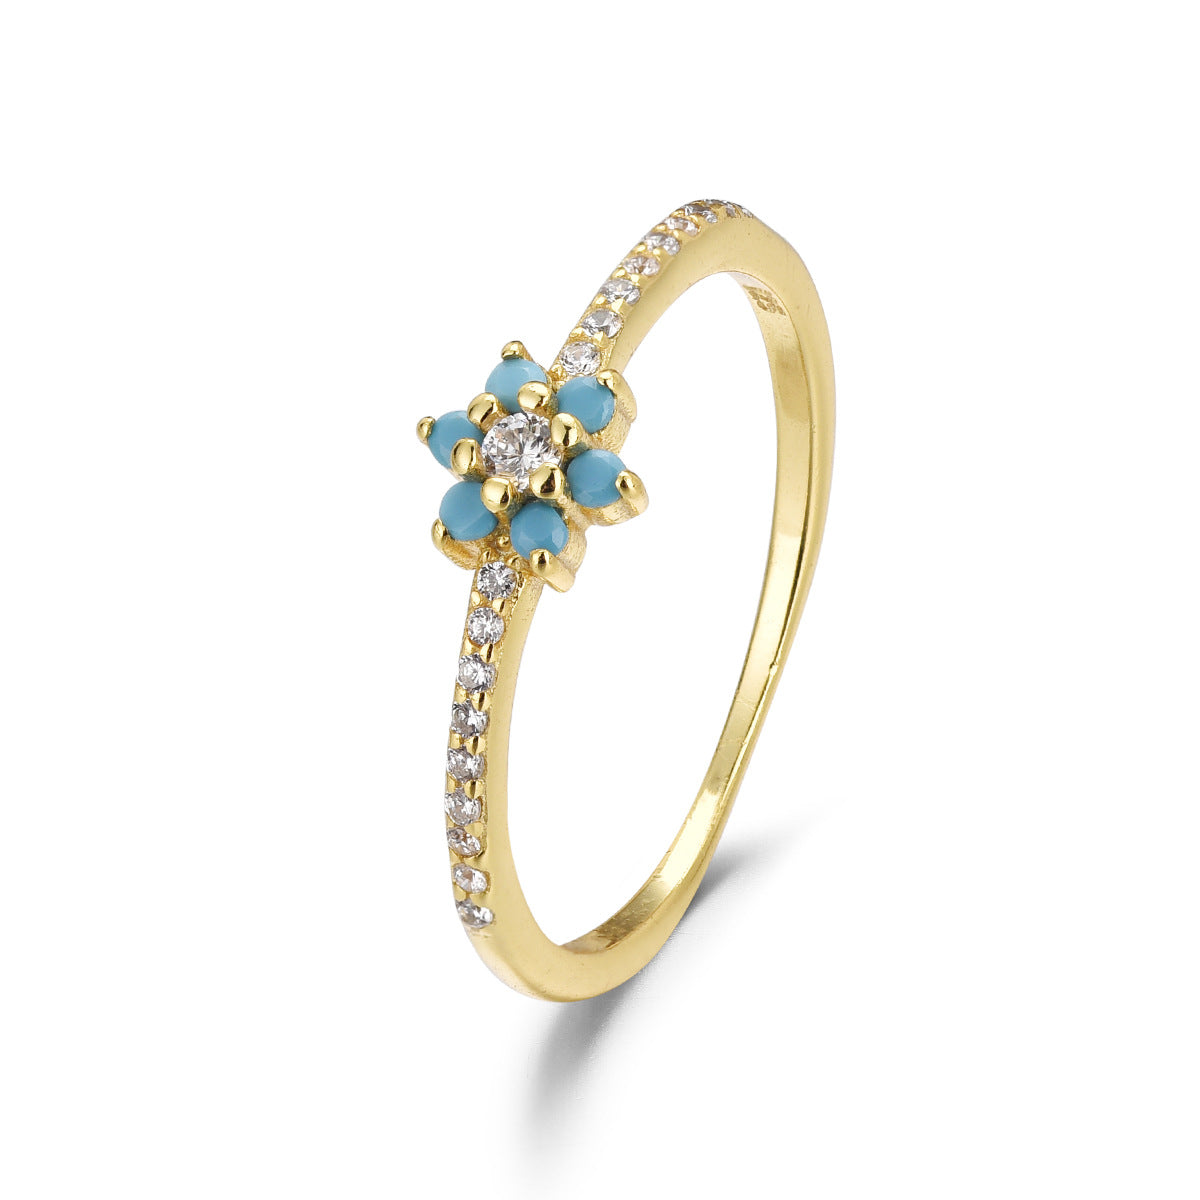 A hand holding a Maramalive™ Women's S925 Silver Simple Little Daisy Flower Ring with diamonds.